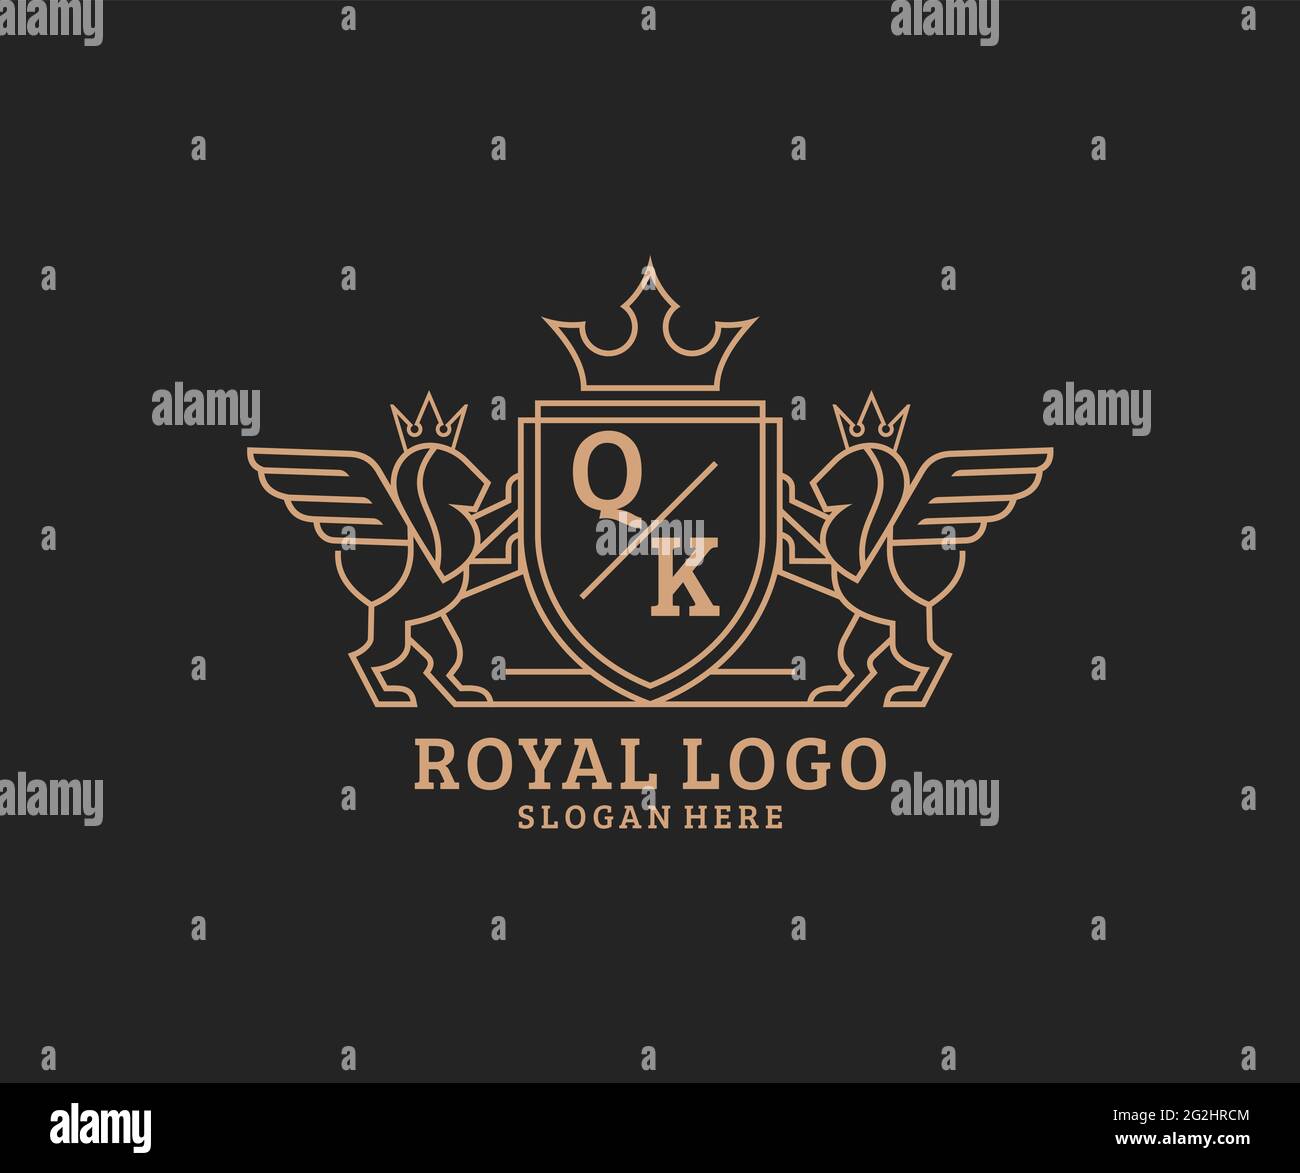 QK Letter Lion Royal Luxury Heraldic,Crest Logo template in vector art for Restaurant, Royalty, Boutique, Cafe, Hotel, Heraldic, Jewelry, Fashion and Stock Vector